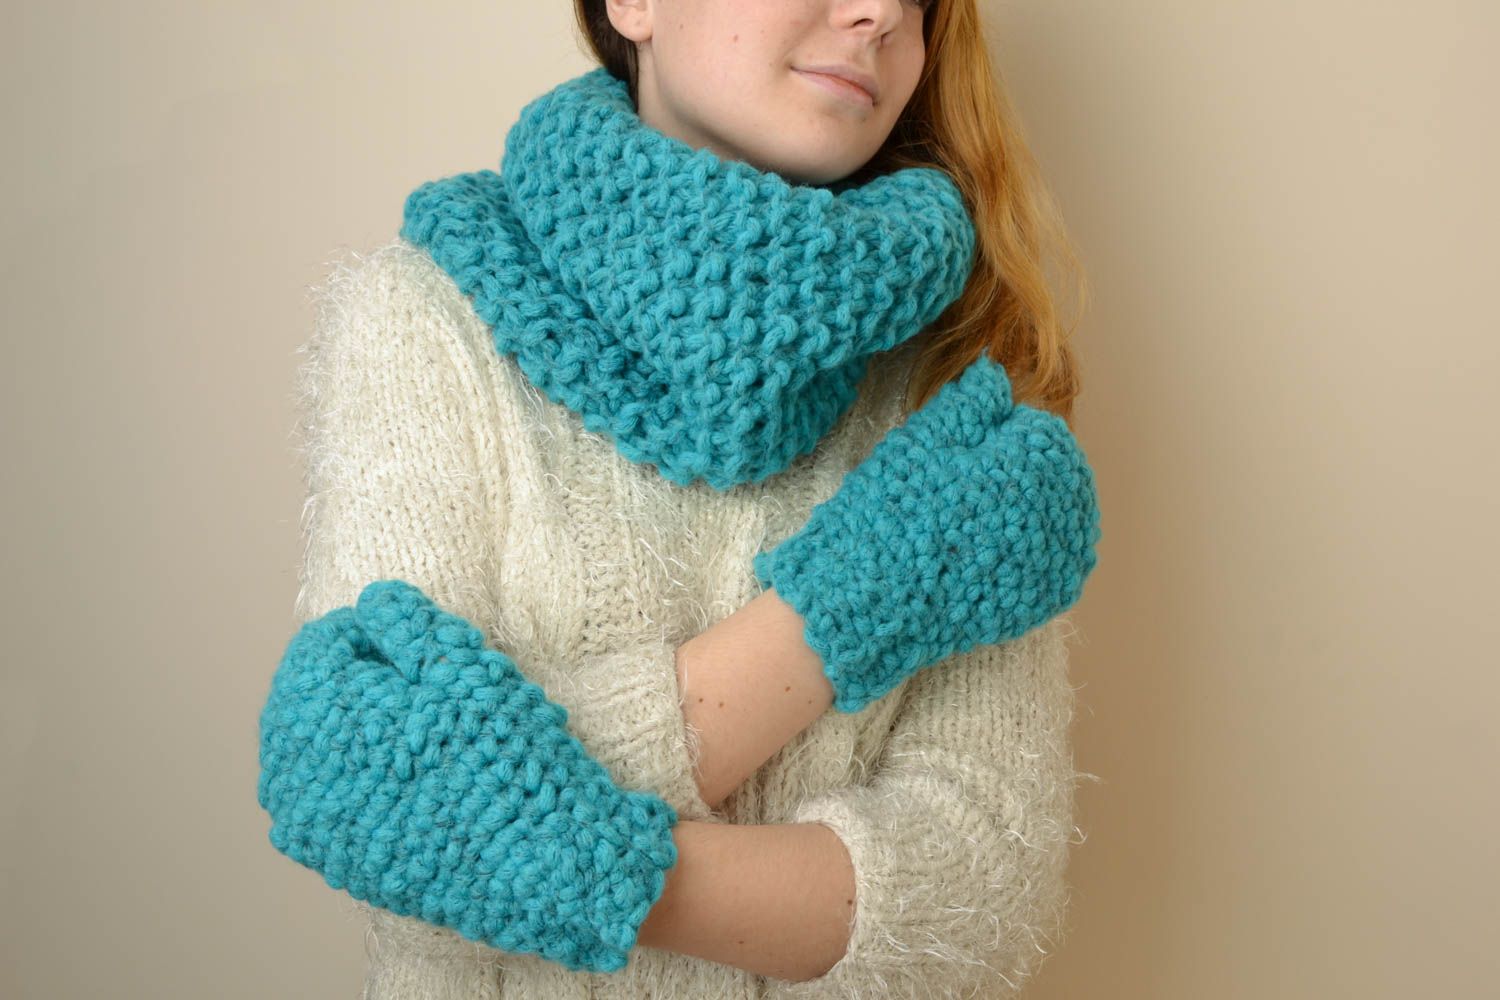 Crochet scarf and mittens photo 1